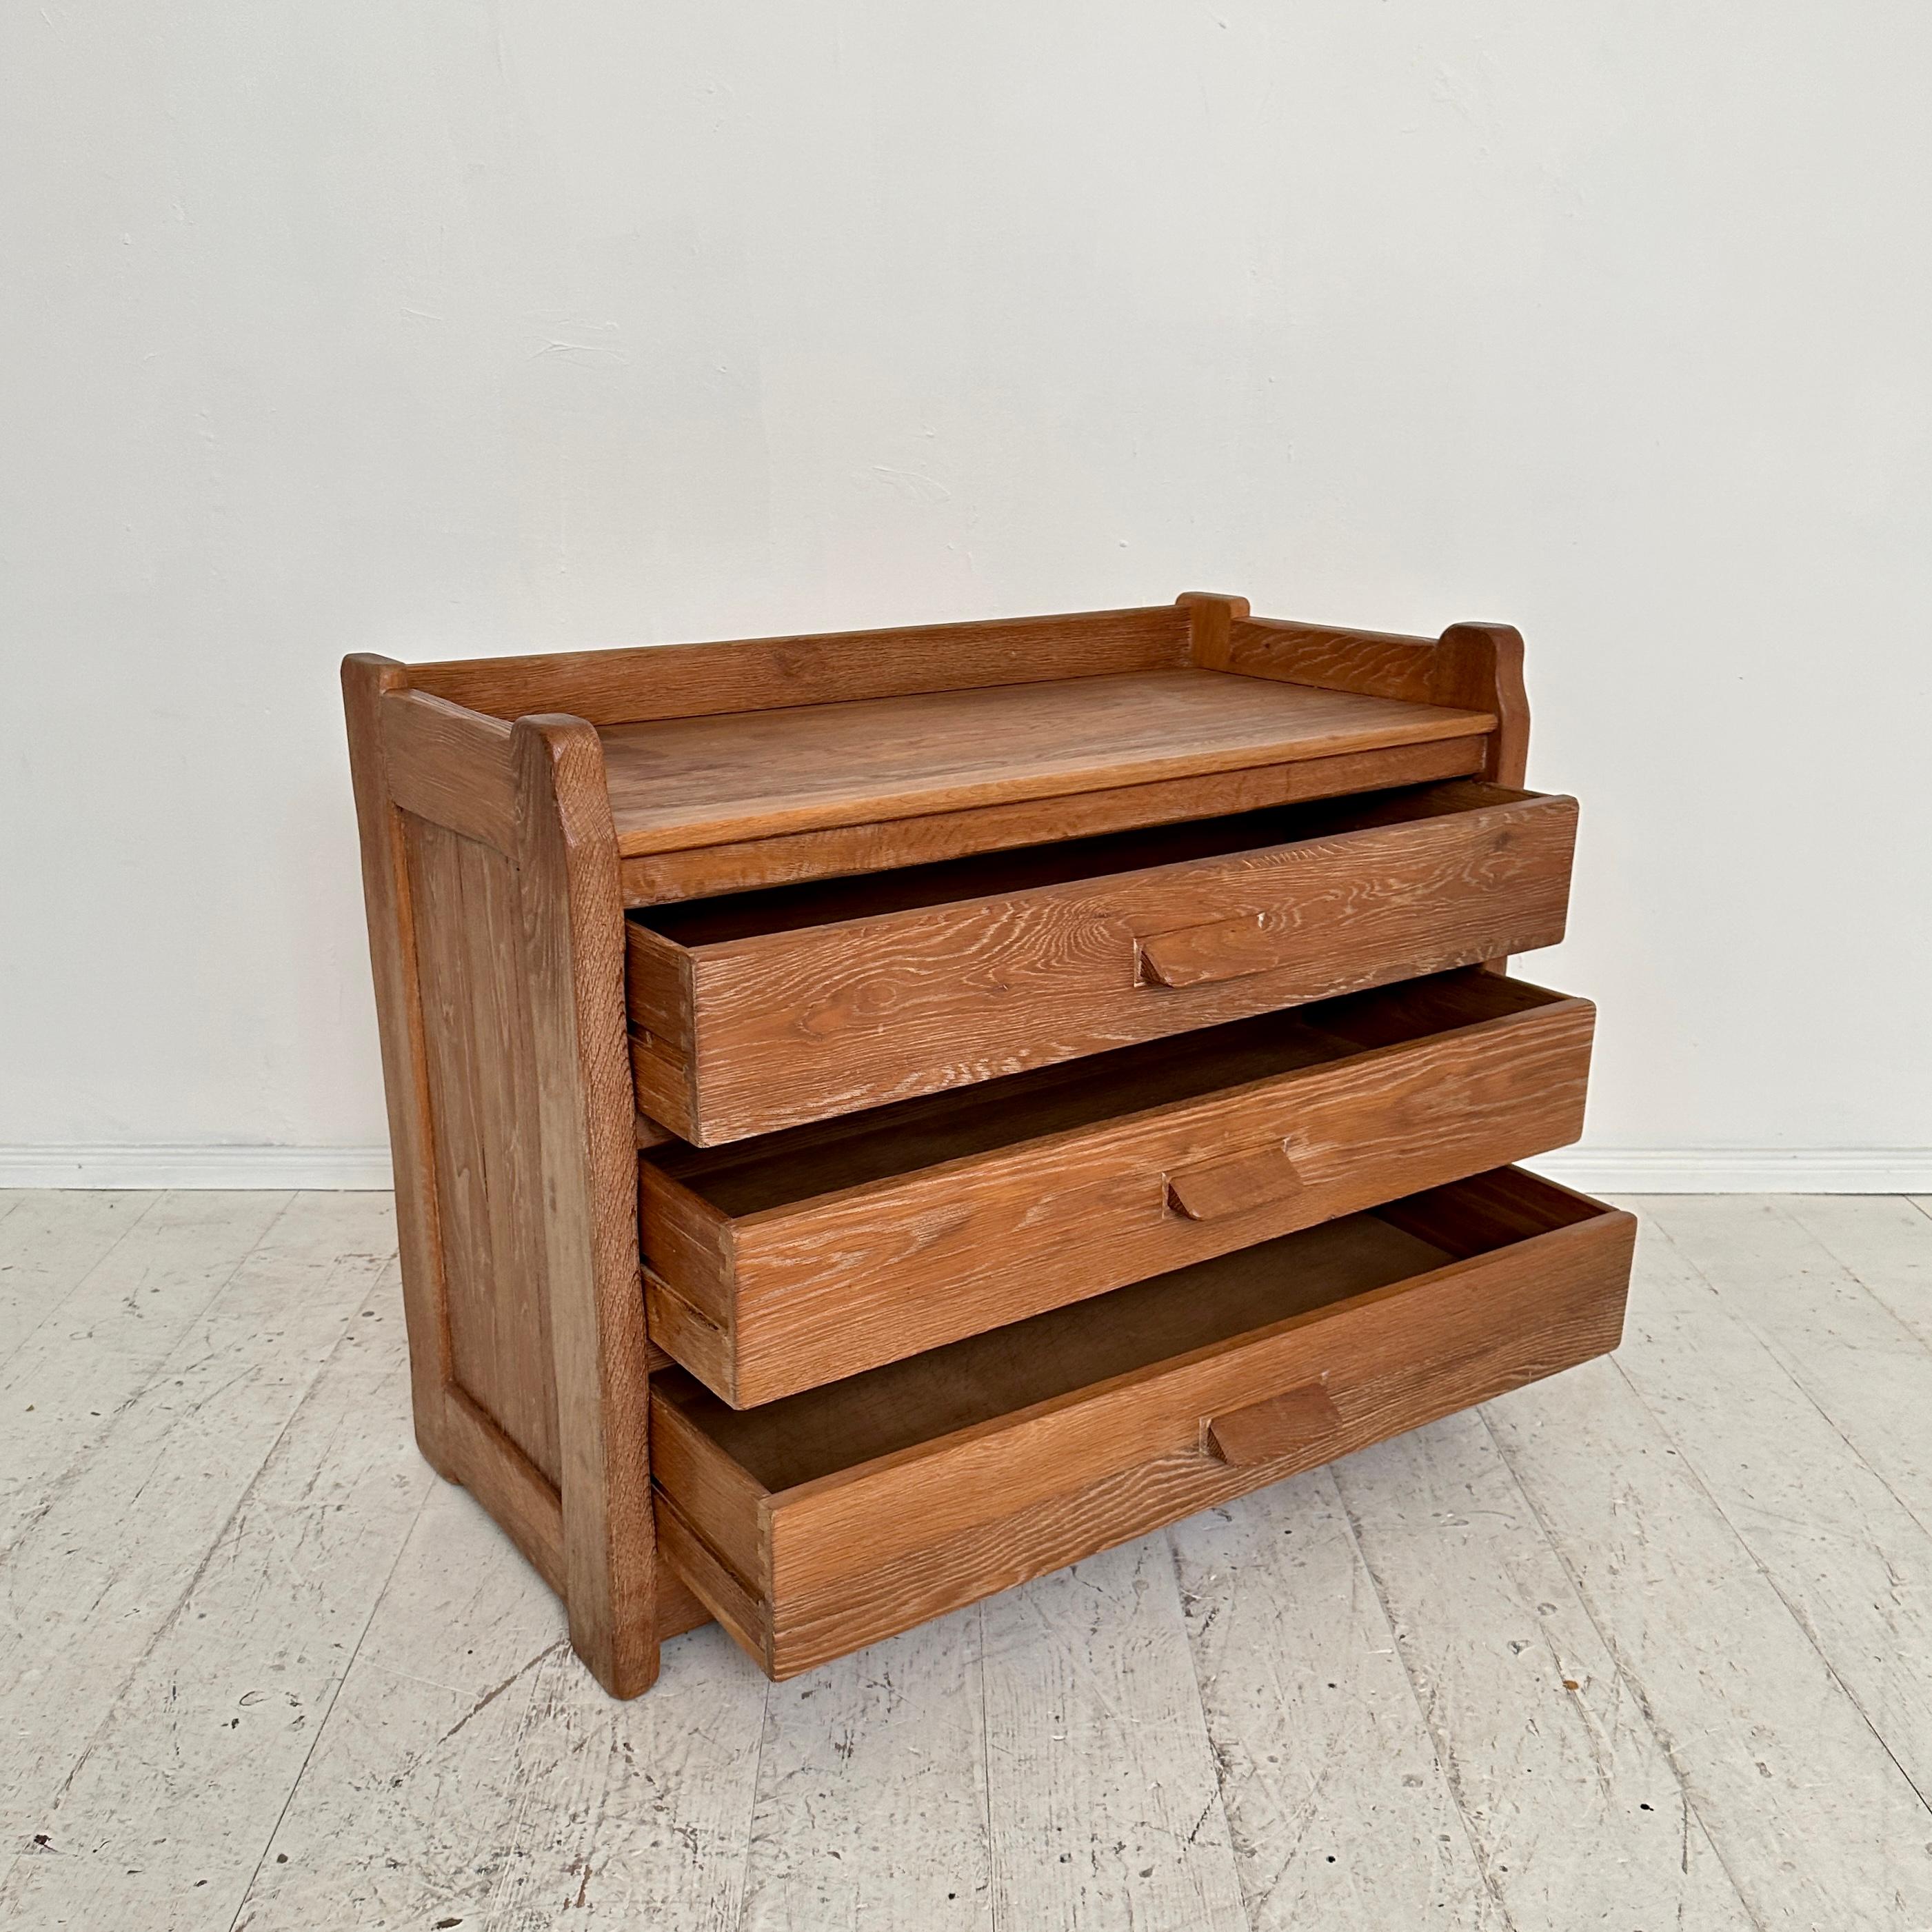 1970s Brutalist Chest of Drawers in Solid Washed Oak by de Puydt, around 1974 For Sale 3